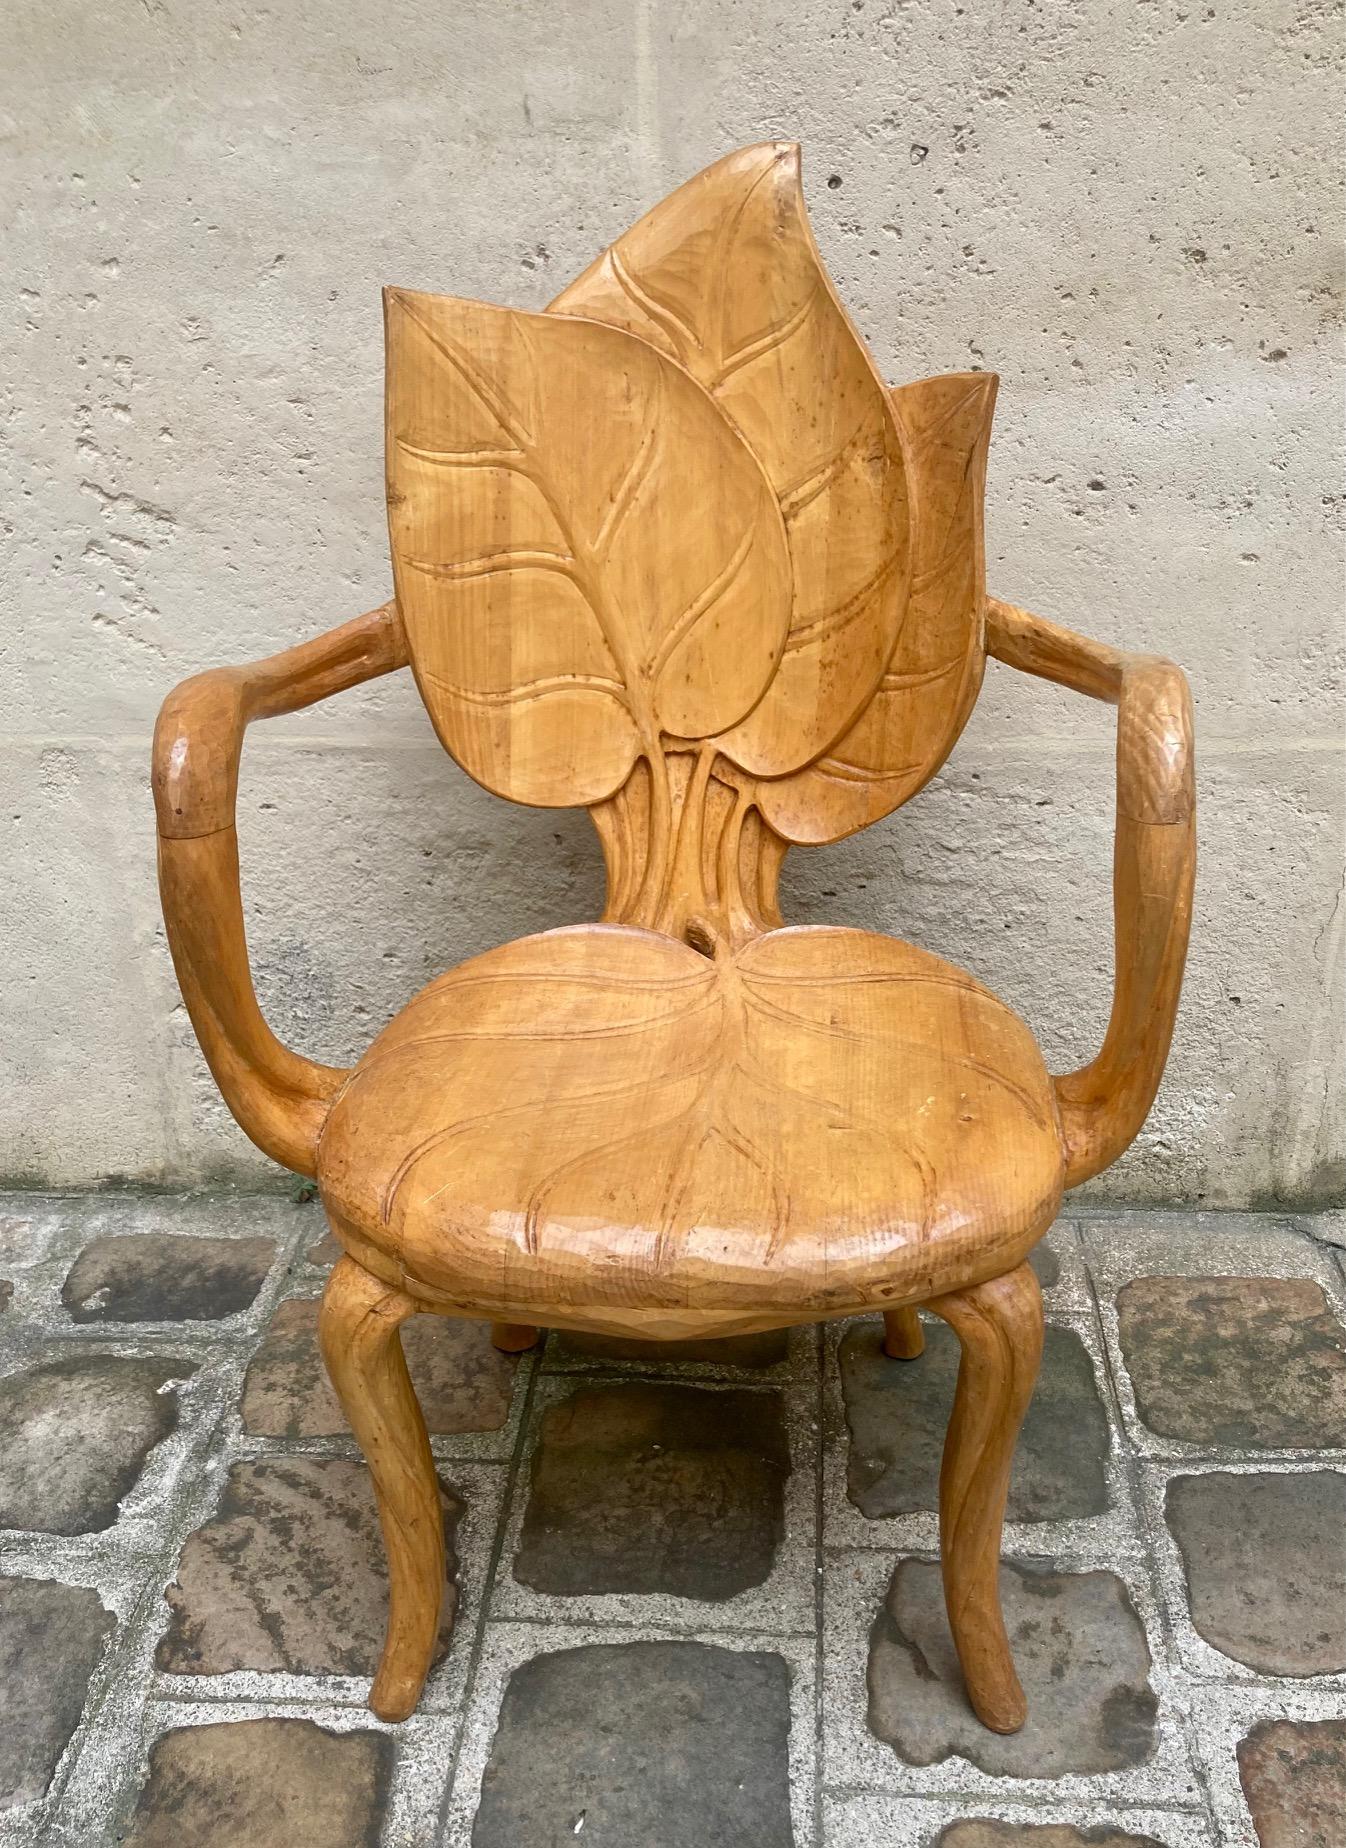 Carved limewood Armchair by Fiorenzo Bartolozzi and Giuseppe Maioli. 
The back of the chair and the seat are carved with leaves motifs. 
Organic shaped arms and feet.
Workshop stamp underneath the seat.
Florence, Italy
1970

Bartolozzi e